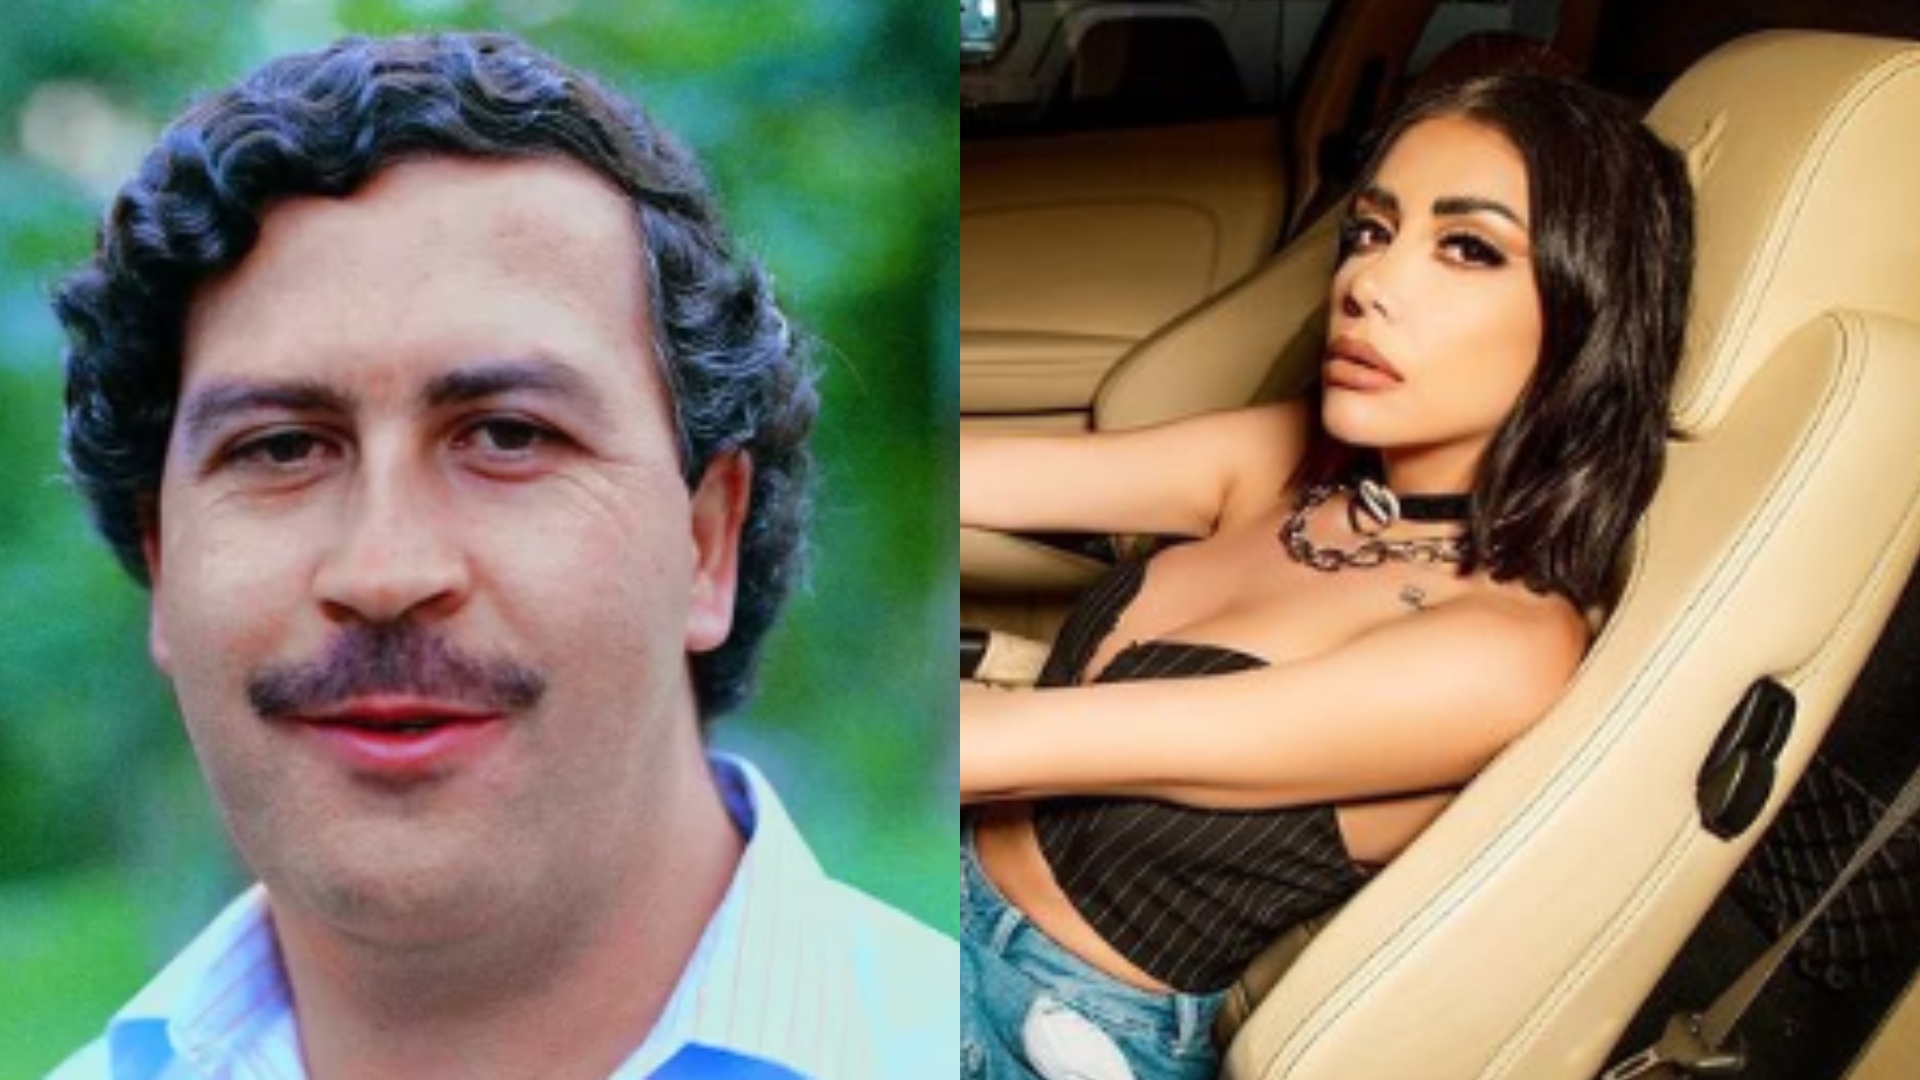 Karime Pindter said that she was inspired by the story of Pablo Escobar (File/Ig karimepindter)